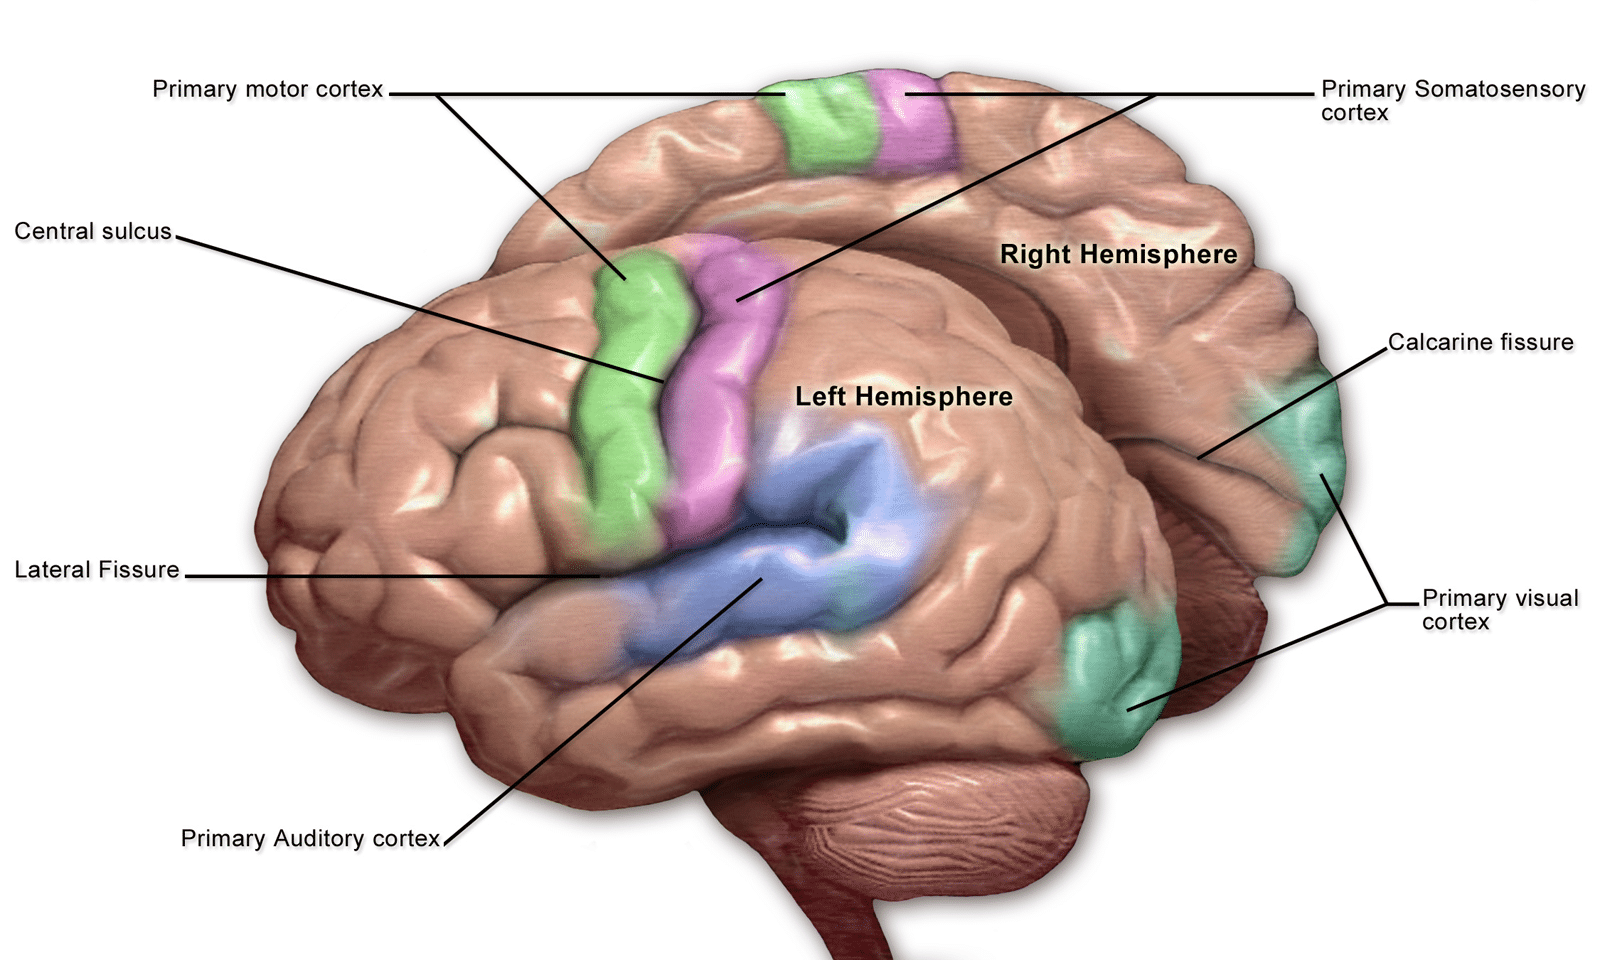 the representation of body parts in primary sensory cortex is